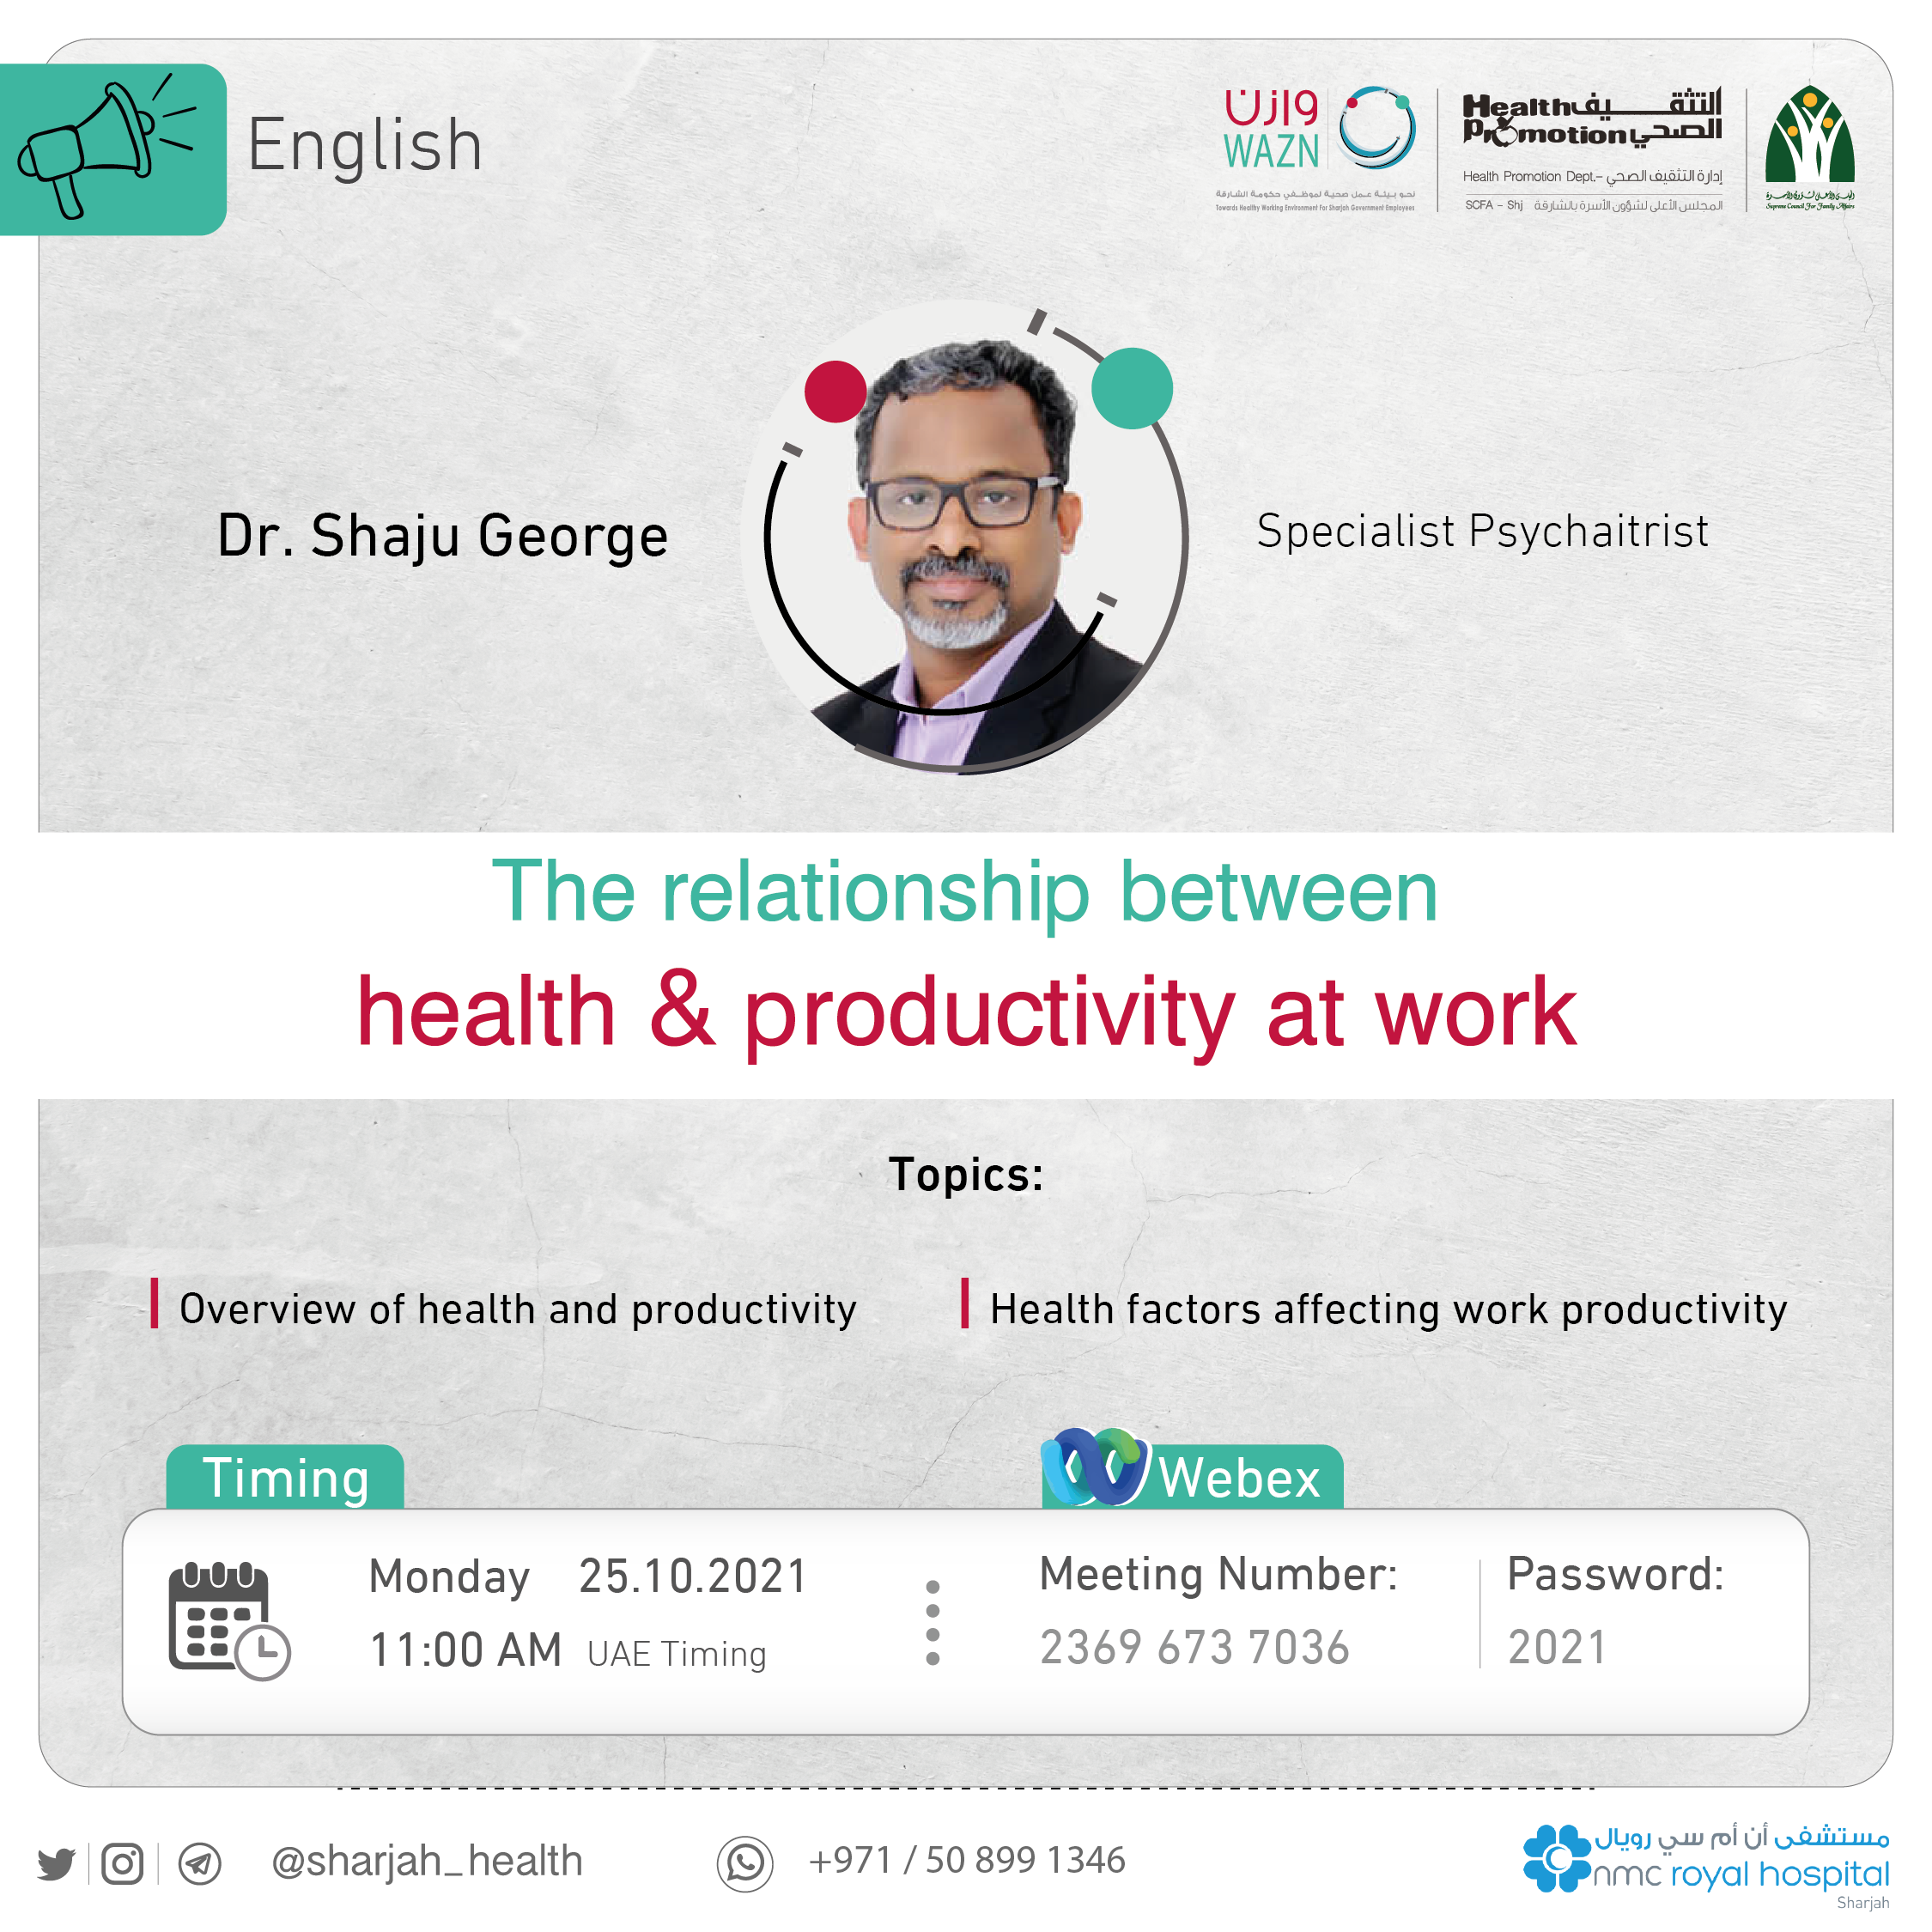 Health and productivity at work